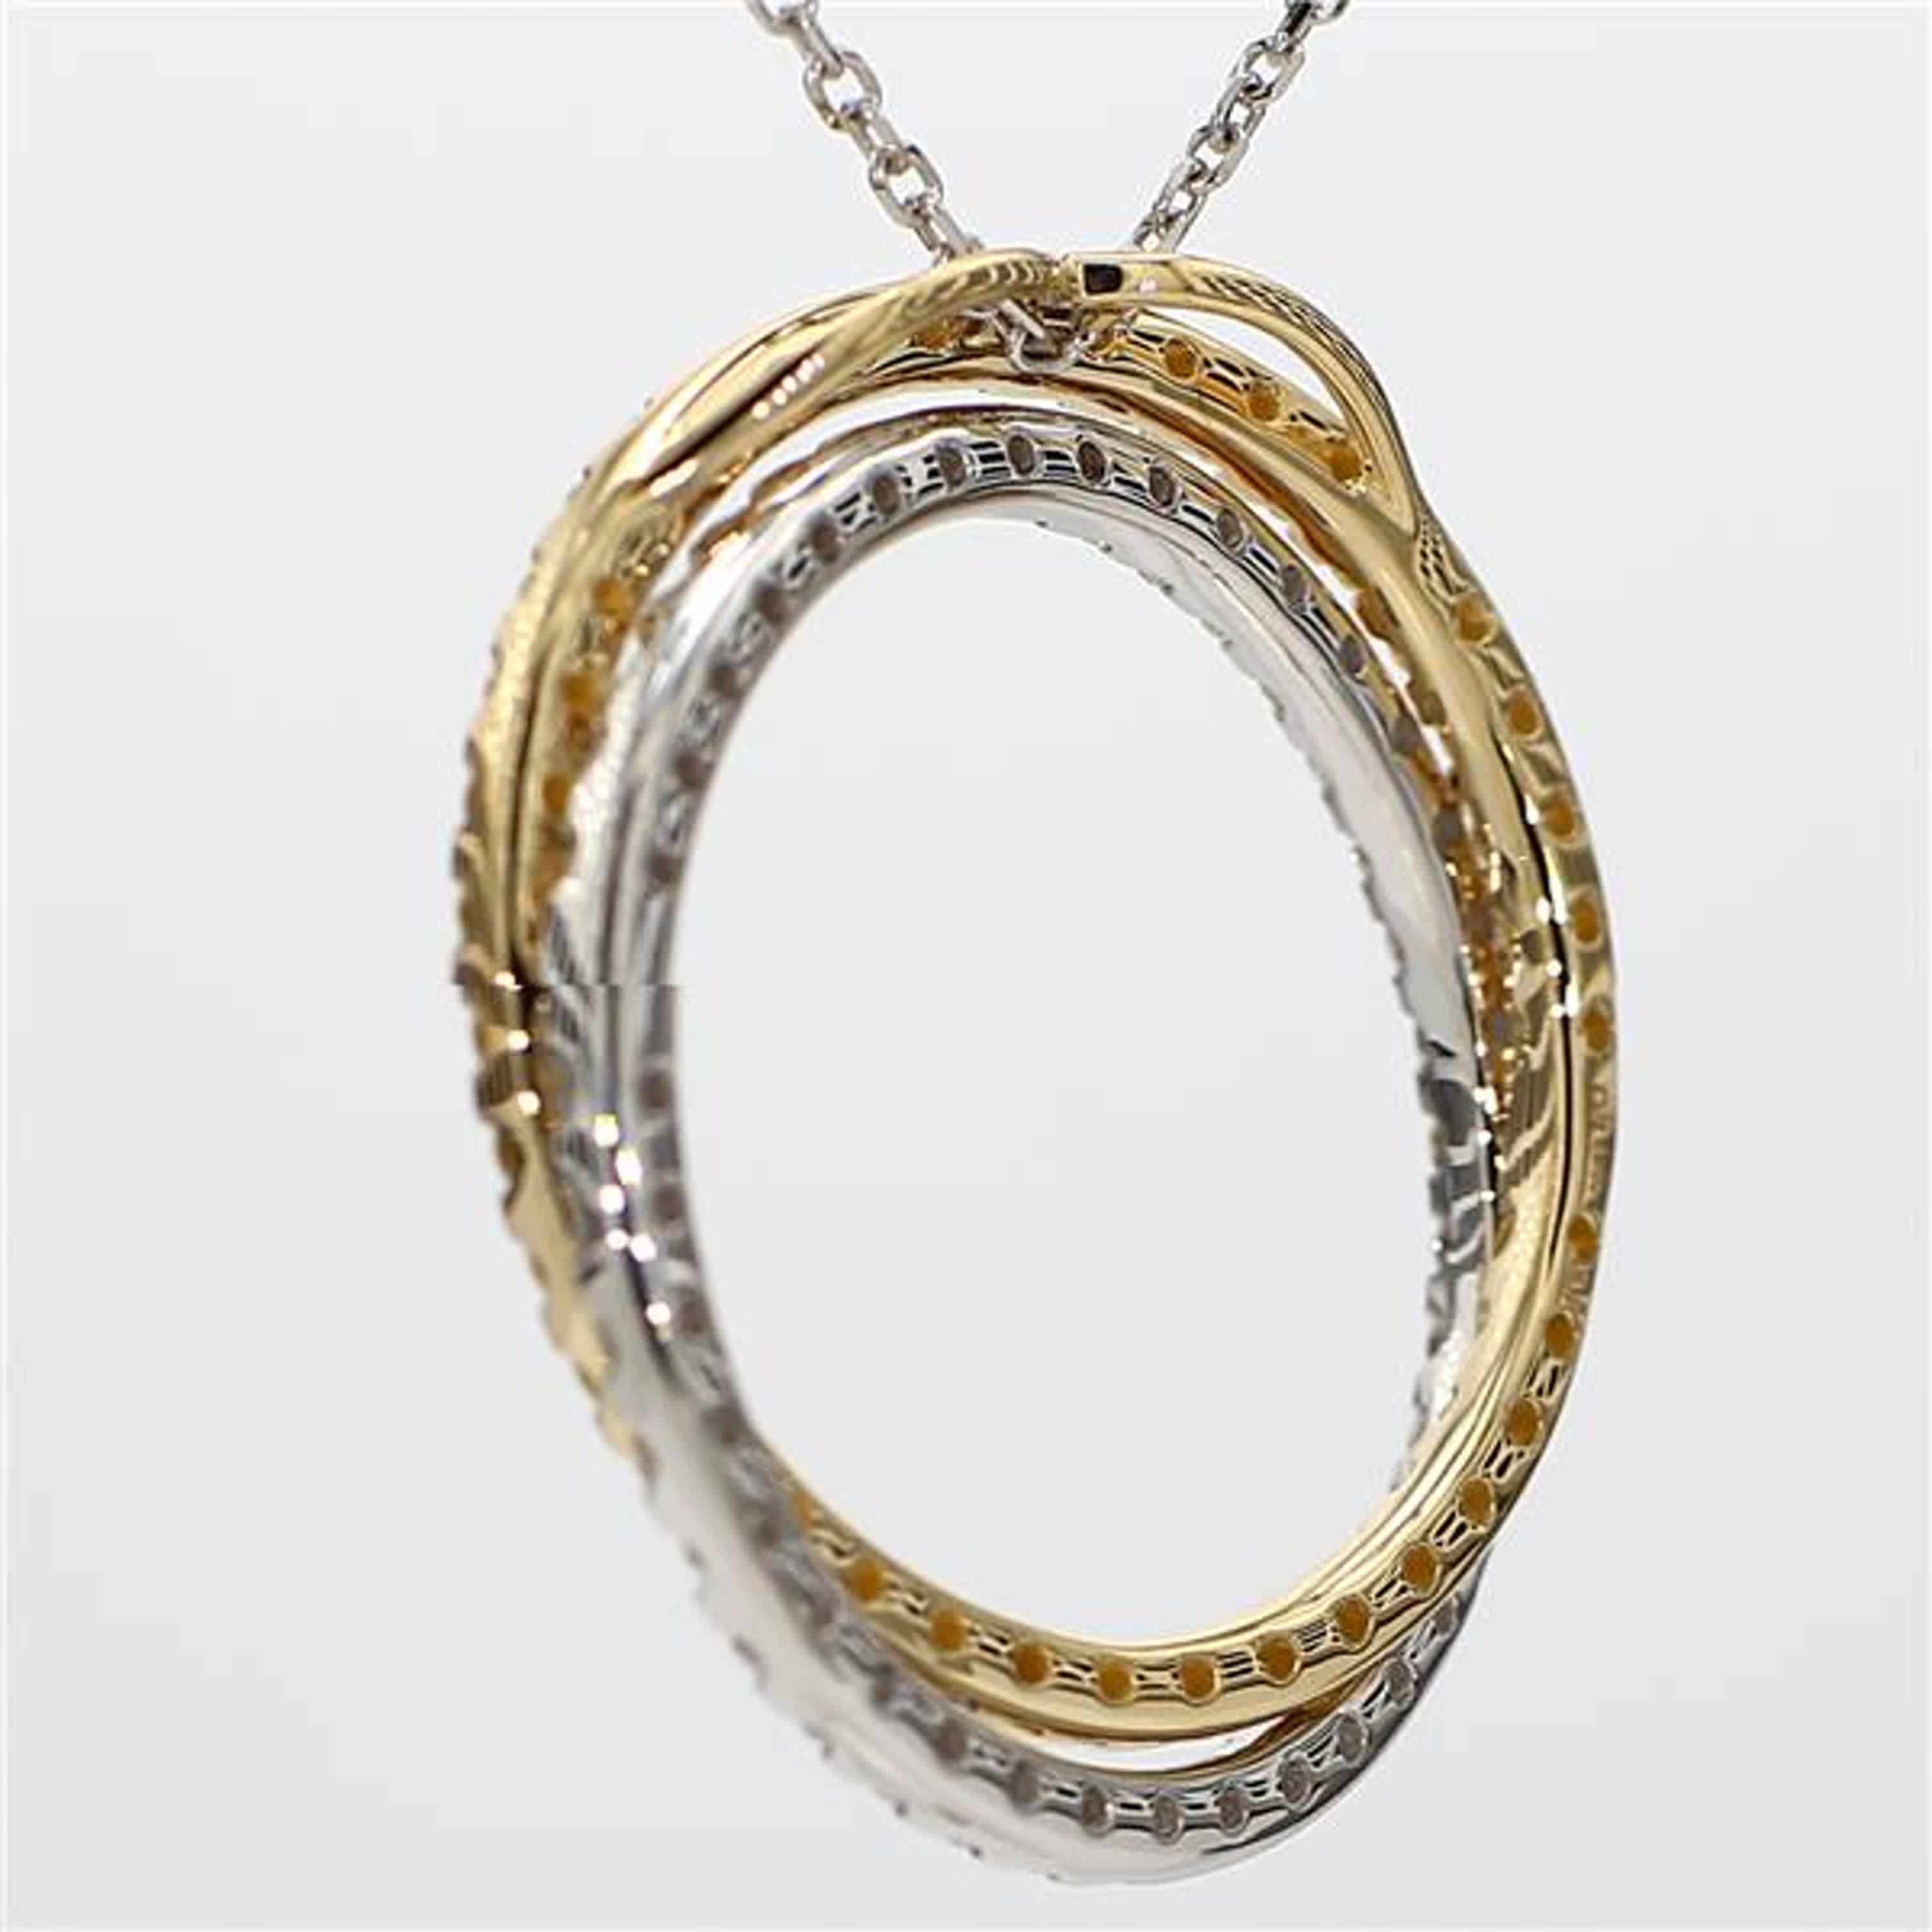 Round Cut Natural Yellow Round and White Diamond 1.97 Carat TW Gold Circle Pendant For Sale